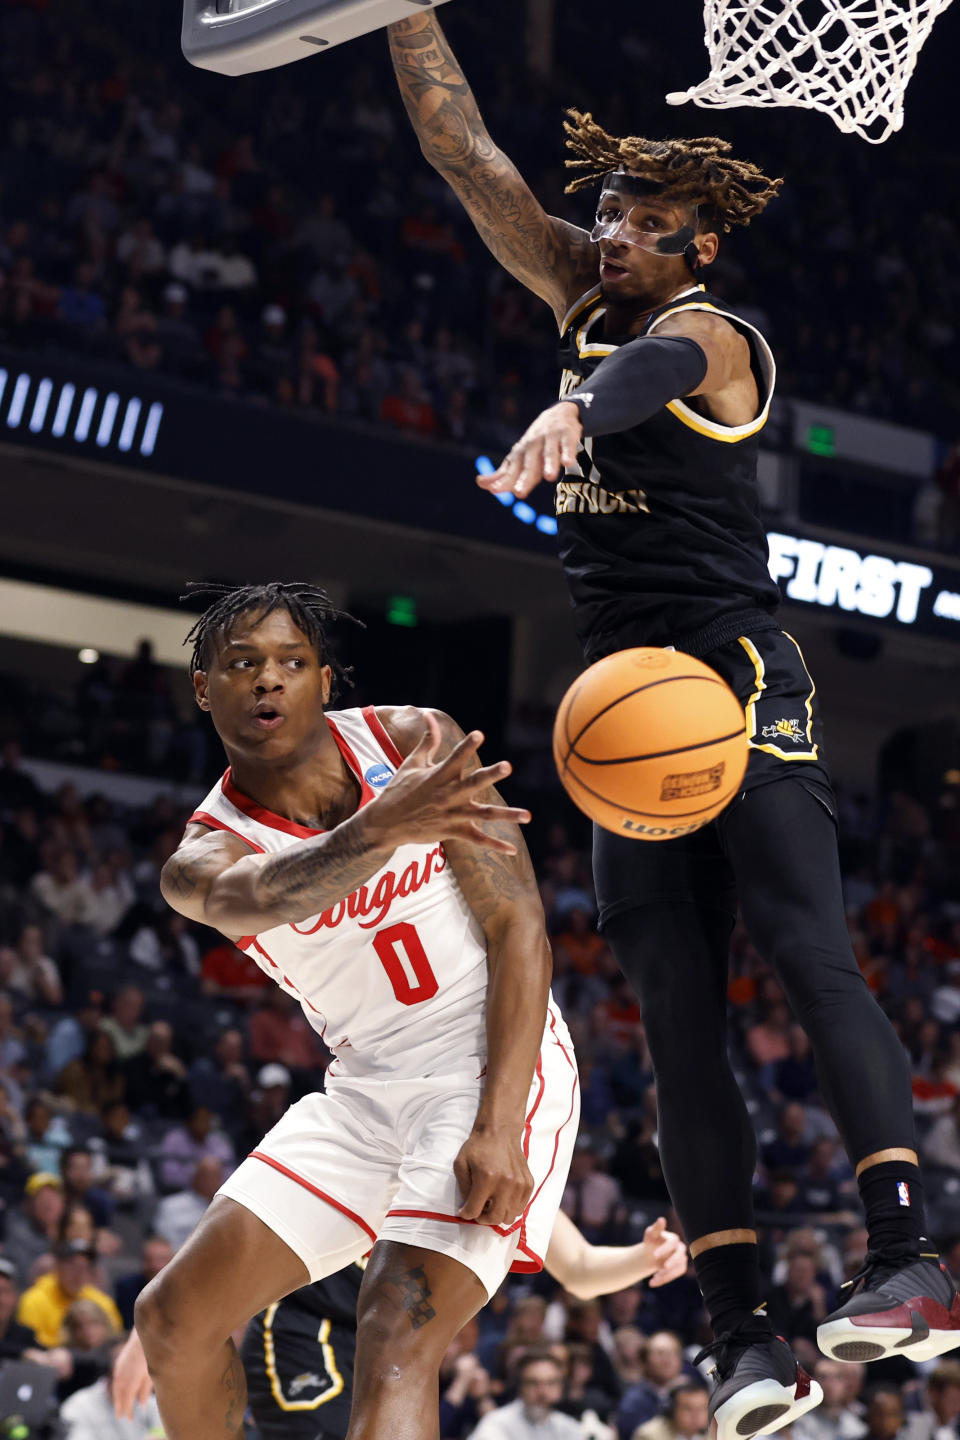 Houston guard Marcus Sasser (0) passes the ball as Northern Kentucky forward Chris Brandon (21) defends during the first half of a first-round college basketball game in the men's NCAA Tournament in Birmingham, Ala., Thursday, March 16, 2023. (AP Photo/Butch Dill)